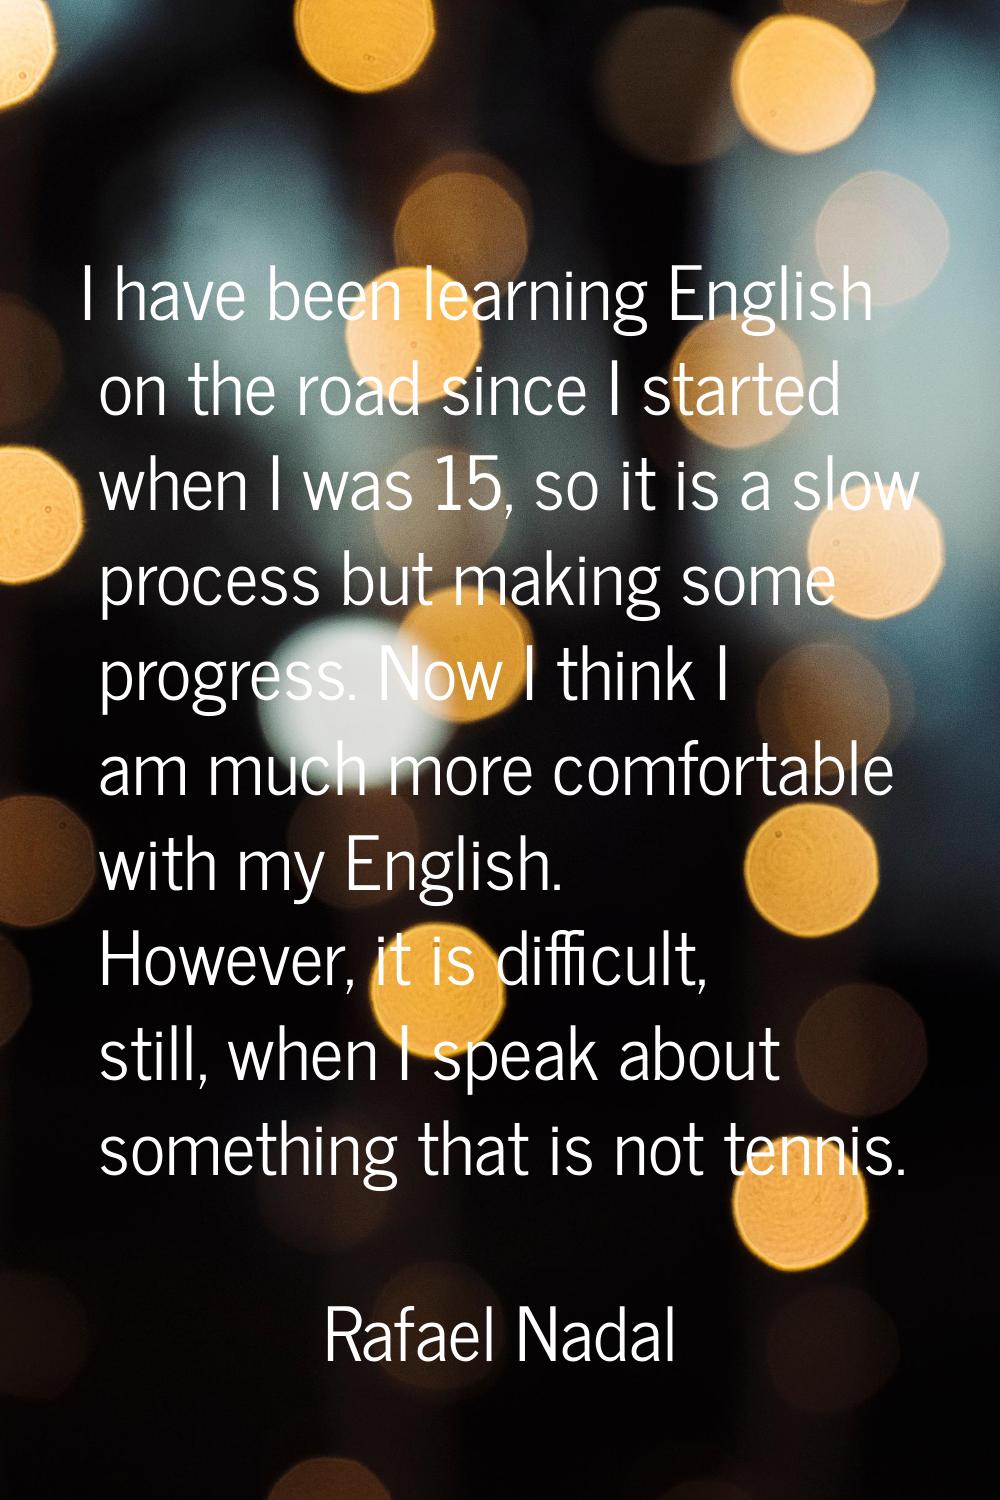 I have been learning English on the road since I started when I was 15, so it is a slow process but